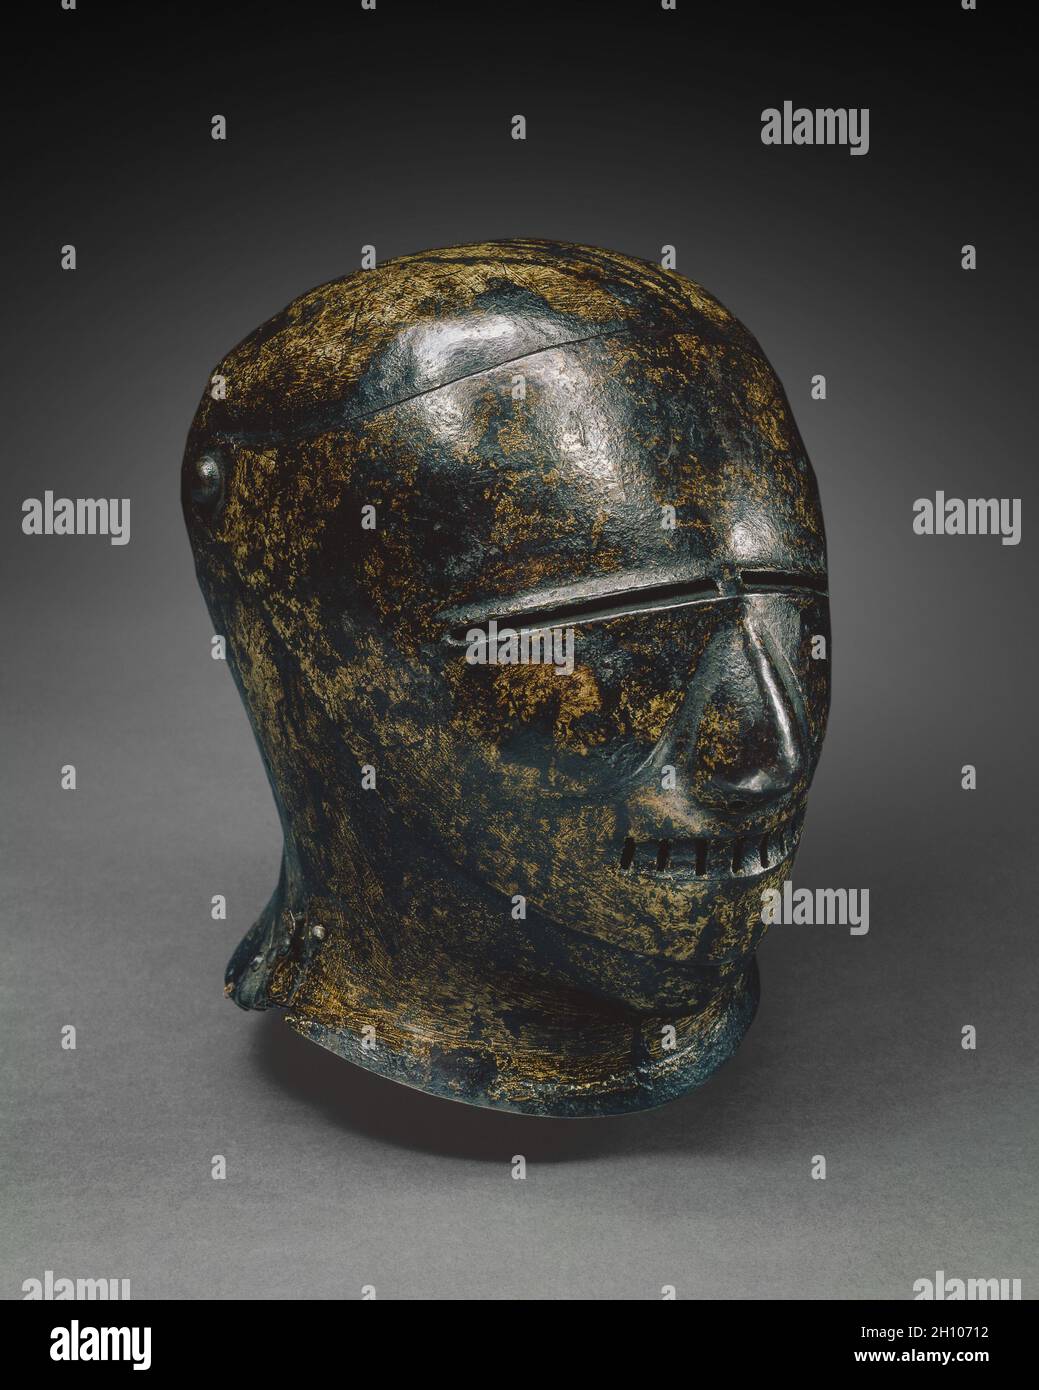 Closed Sallet with Grotesque Face (Schembart visor), c. 1500. Germany, Nuremberg, early 16th Century. Painted steel; overall: 27.3 x 25.7 x 22.2 cm (10 3/4 x 10 1/8 x 8 3/4 in.).  A small number of similar painted helmets survive today. All appear to date to the early 1500s. The visors of these helmets are usually in the form of fiercely grimacing human or animal faces, known as Schembart visors after the masked revelers in the Schembartlaufen, the medieval Shrovetide parades. The city of Nuremberg was particularly famous for its Shrovetide parades that were often held in conjunction with a to Stock Photo